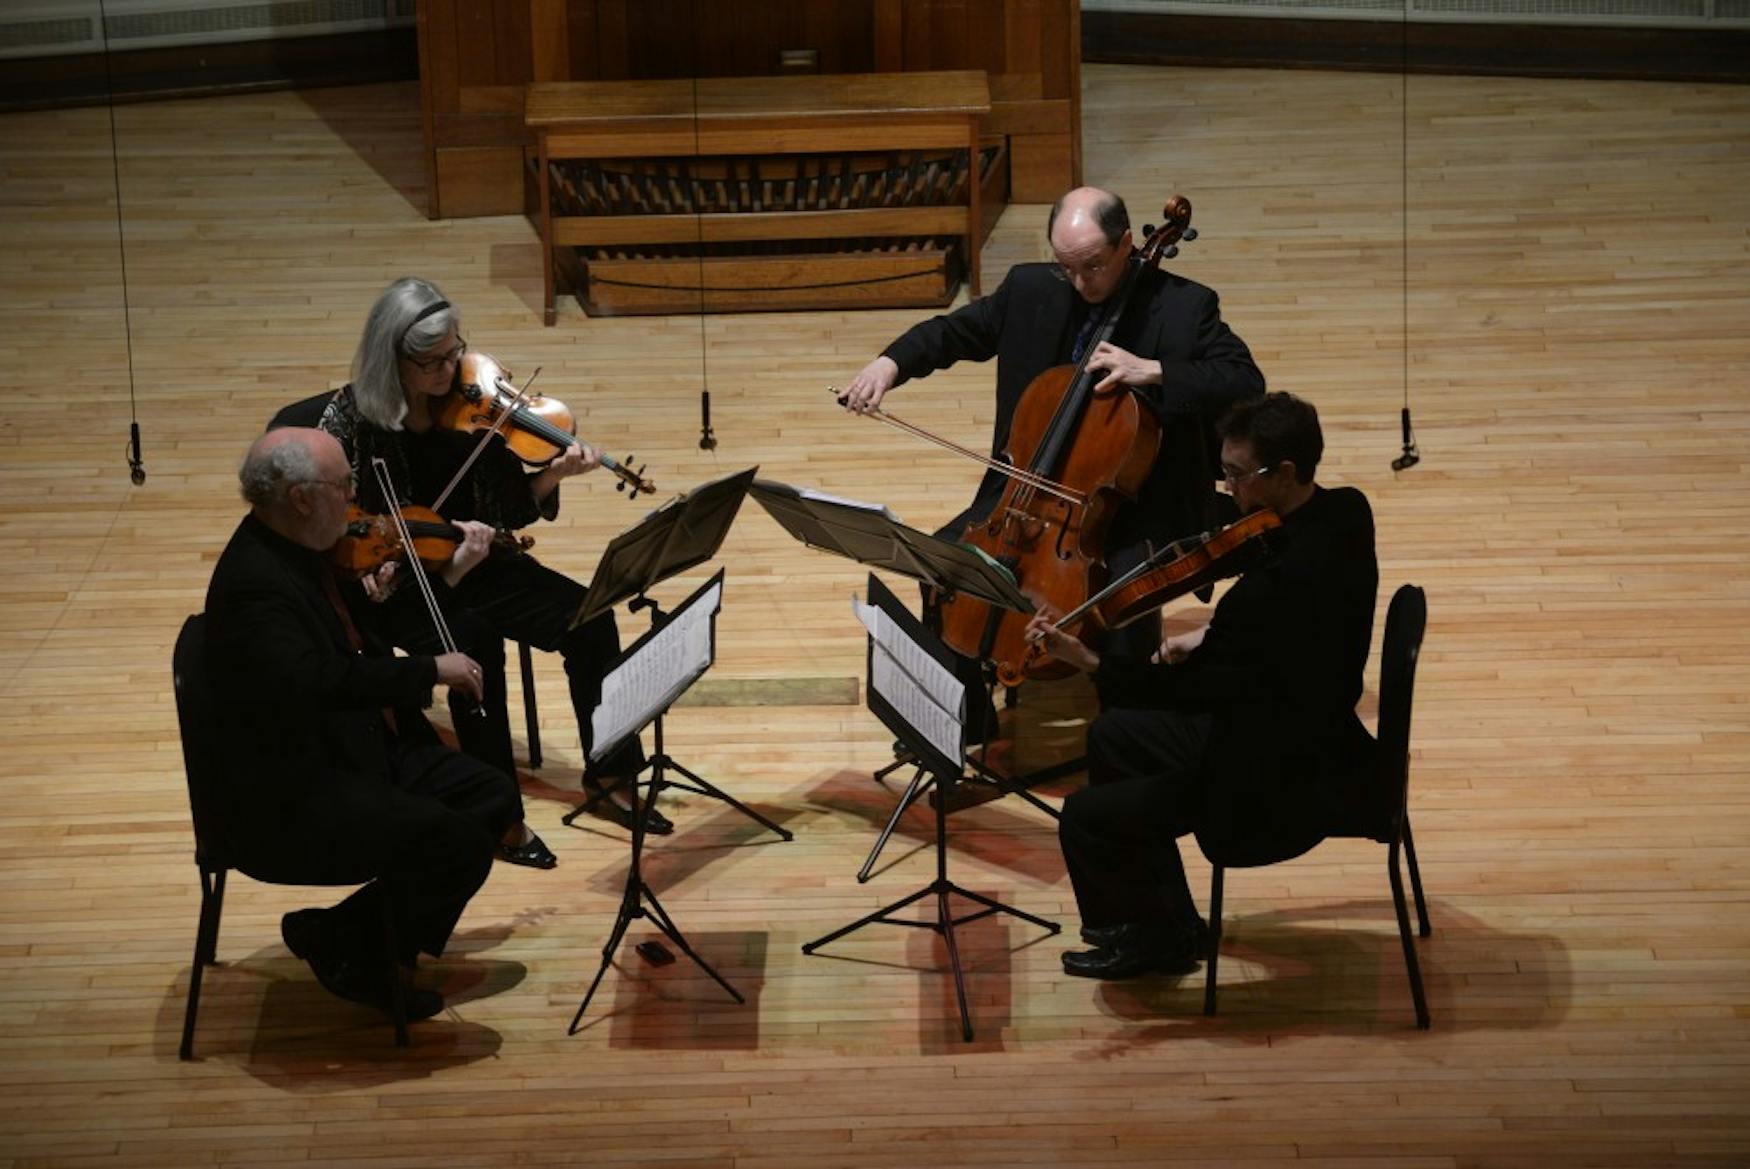 ON A HIGH NOTE: On Saturday night, the Lydian String Quartet, joined by new violist, performed three quartets to a full house.